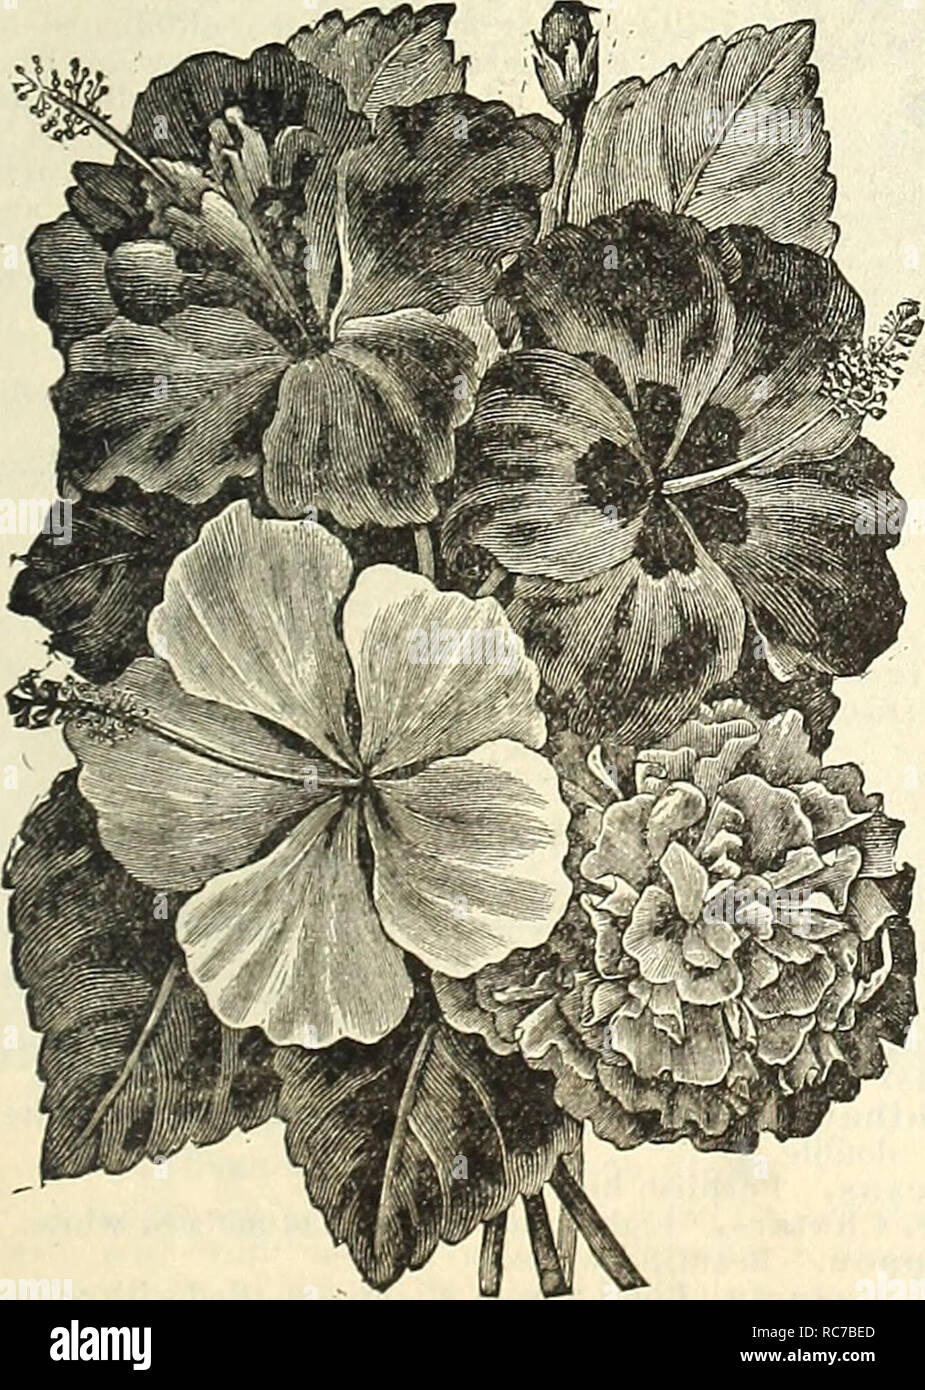 . Dreer's garden calendar for 1887. Seeds Catalogs; Nursery stock Catalogs; Gardening Catalogs; Flowers Seeds Catalogs. HELIOTROPE. Queen of the Violets. Every season brings a number of Heliotropes new in name. In this variety we have one really new, and a de- cided acquisition when acclimated ; its color is of the deepest violet-purple, with large, almost pure white eye, and very fragrant. The plant is of vigorous habit and very floriferous. 25 cts. each; 5 for $1.00. HELIOTROPES. Chieftain. Lilac, large truss. Grandiflorum. Pale lilac. Mad. de Blonay. Large truss, nearly pure white. Marie Bo Stock Photo